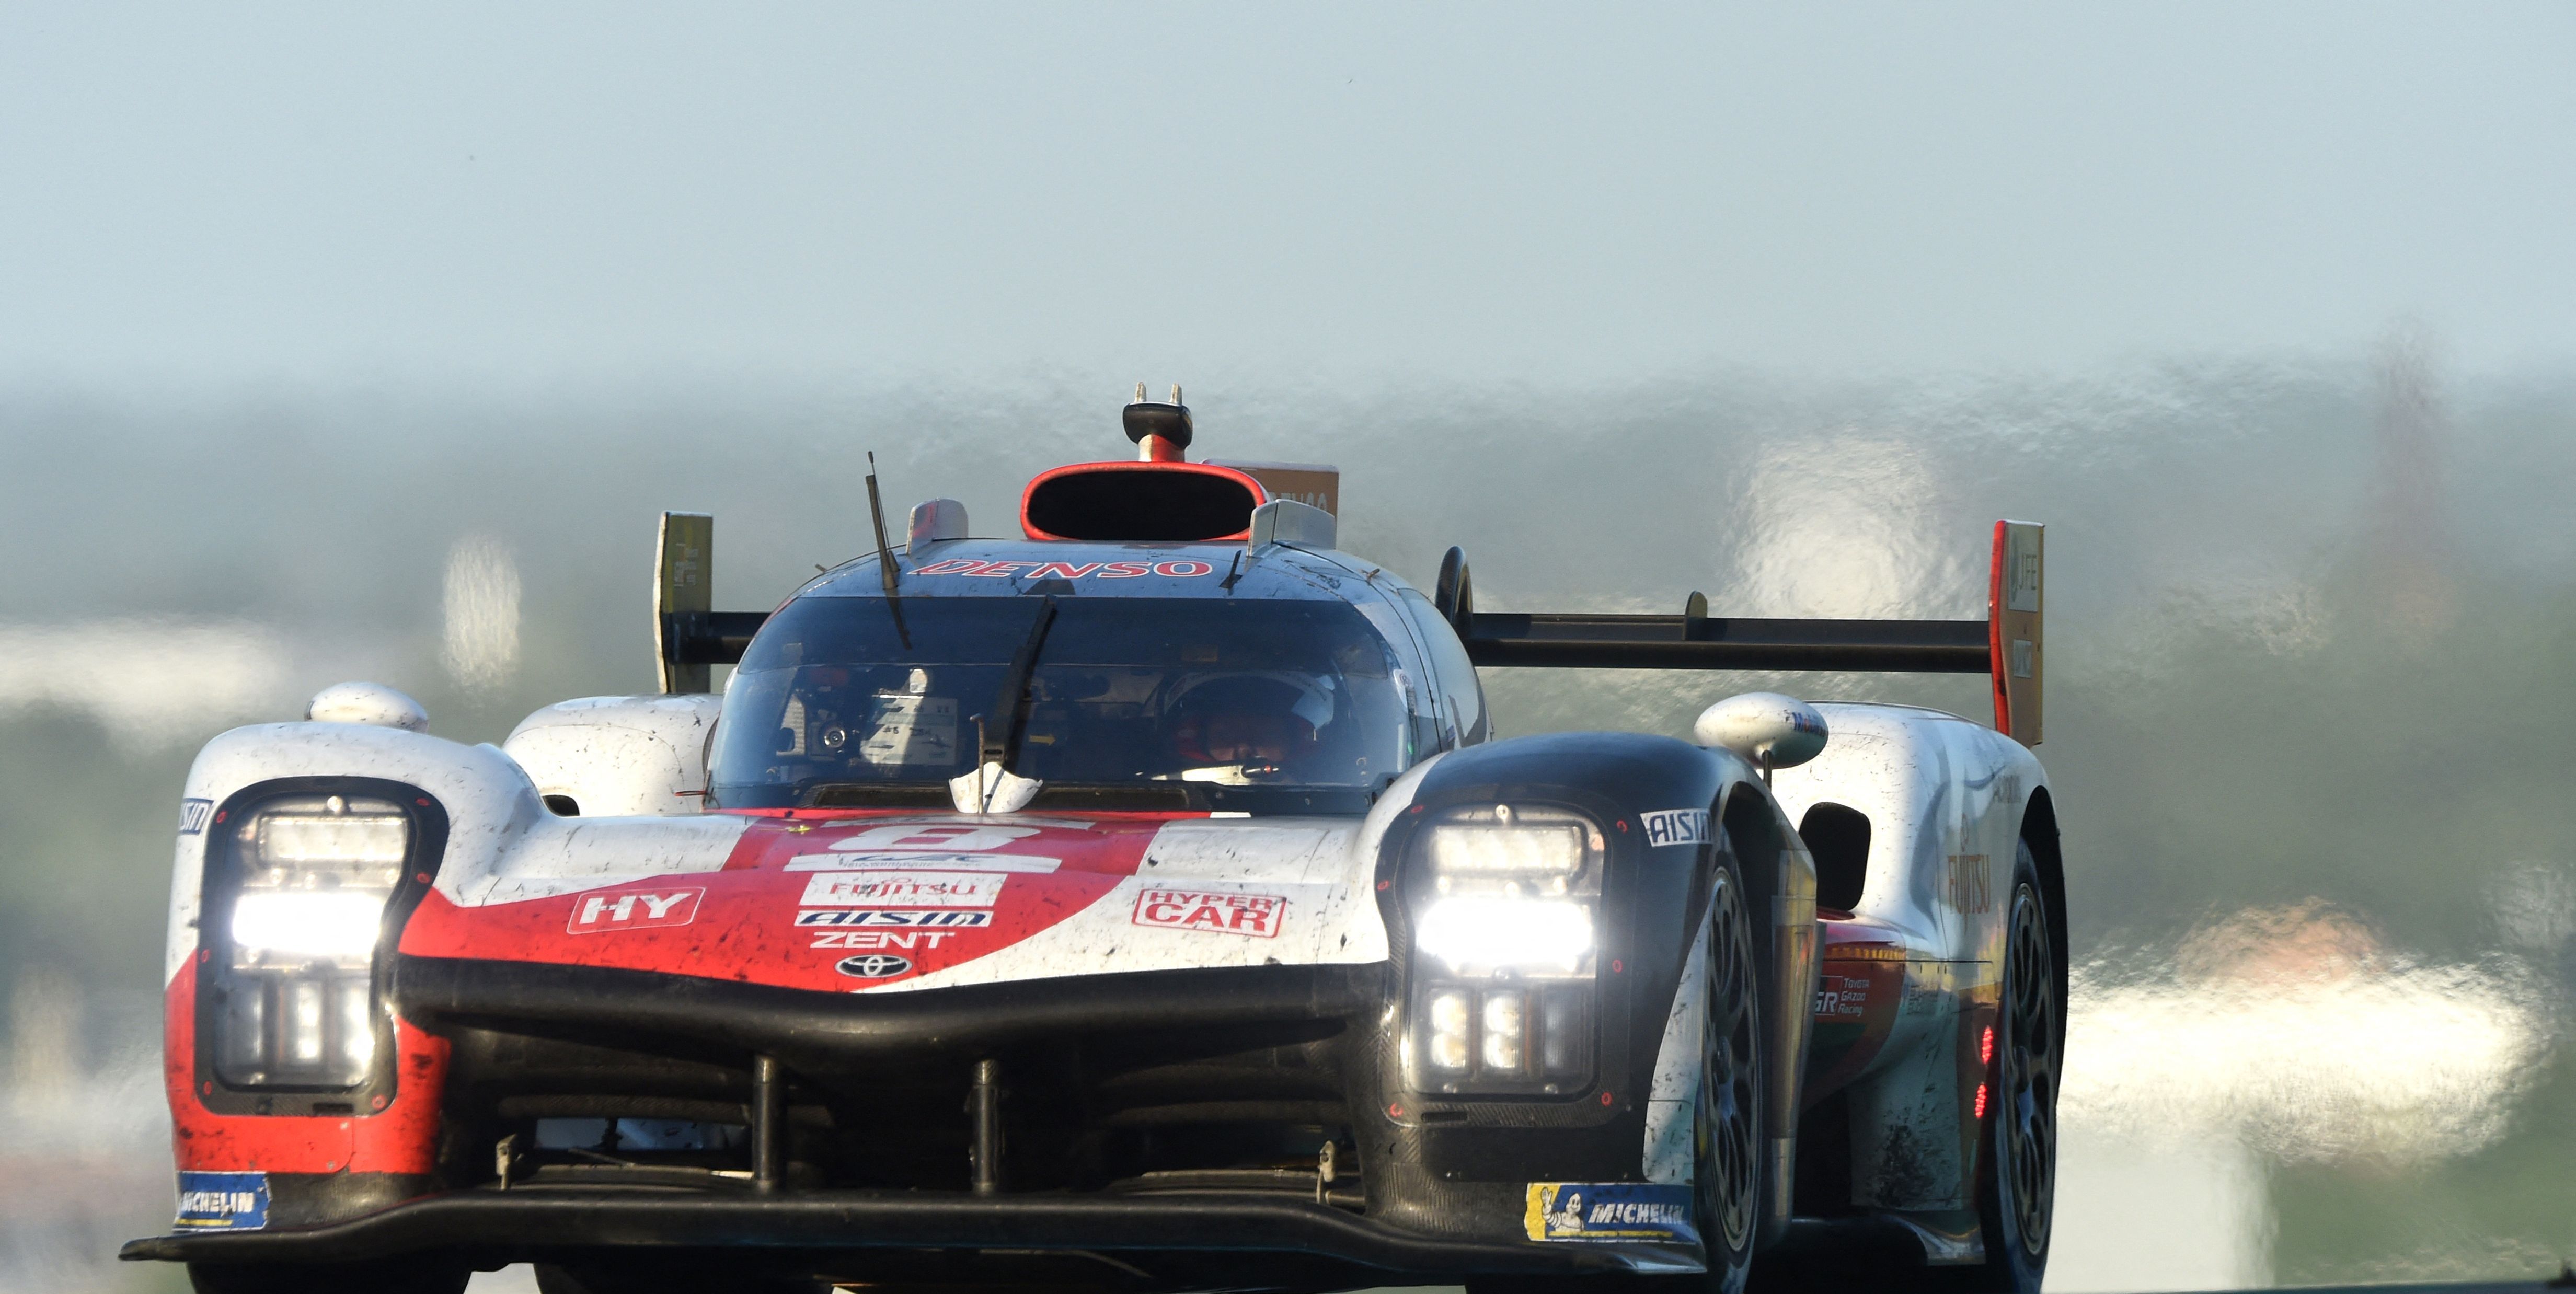 Toyota Coasts to Fifth Straight Le Mans Win